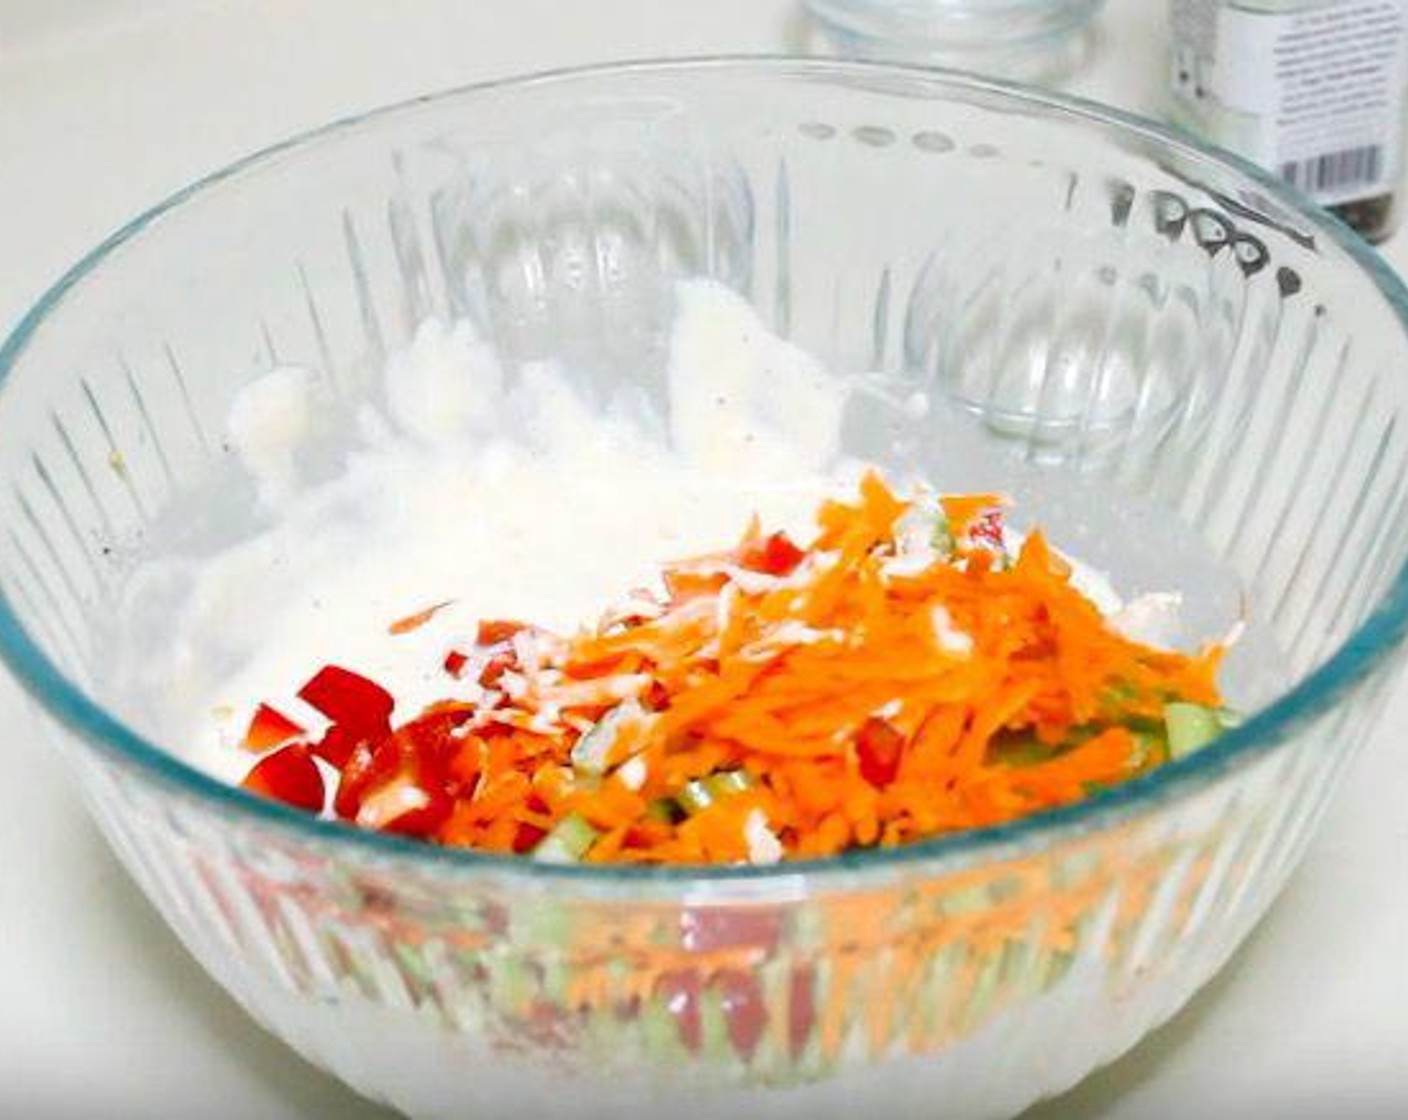 step 3 To the dressing, add Celery (1/3 cup), Red Bell Pepper (1/2 cup), Onion (1/4 cup), and Carrot (1/3 cup). Store in fridge until pasta is ready.